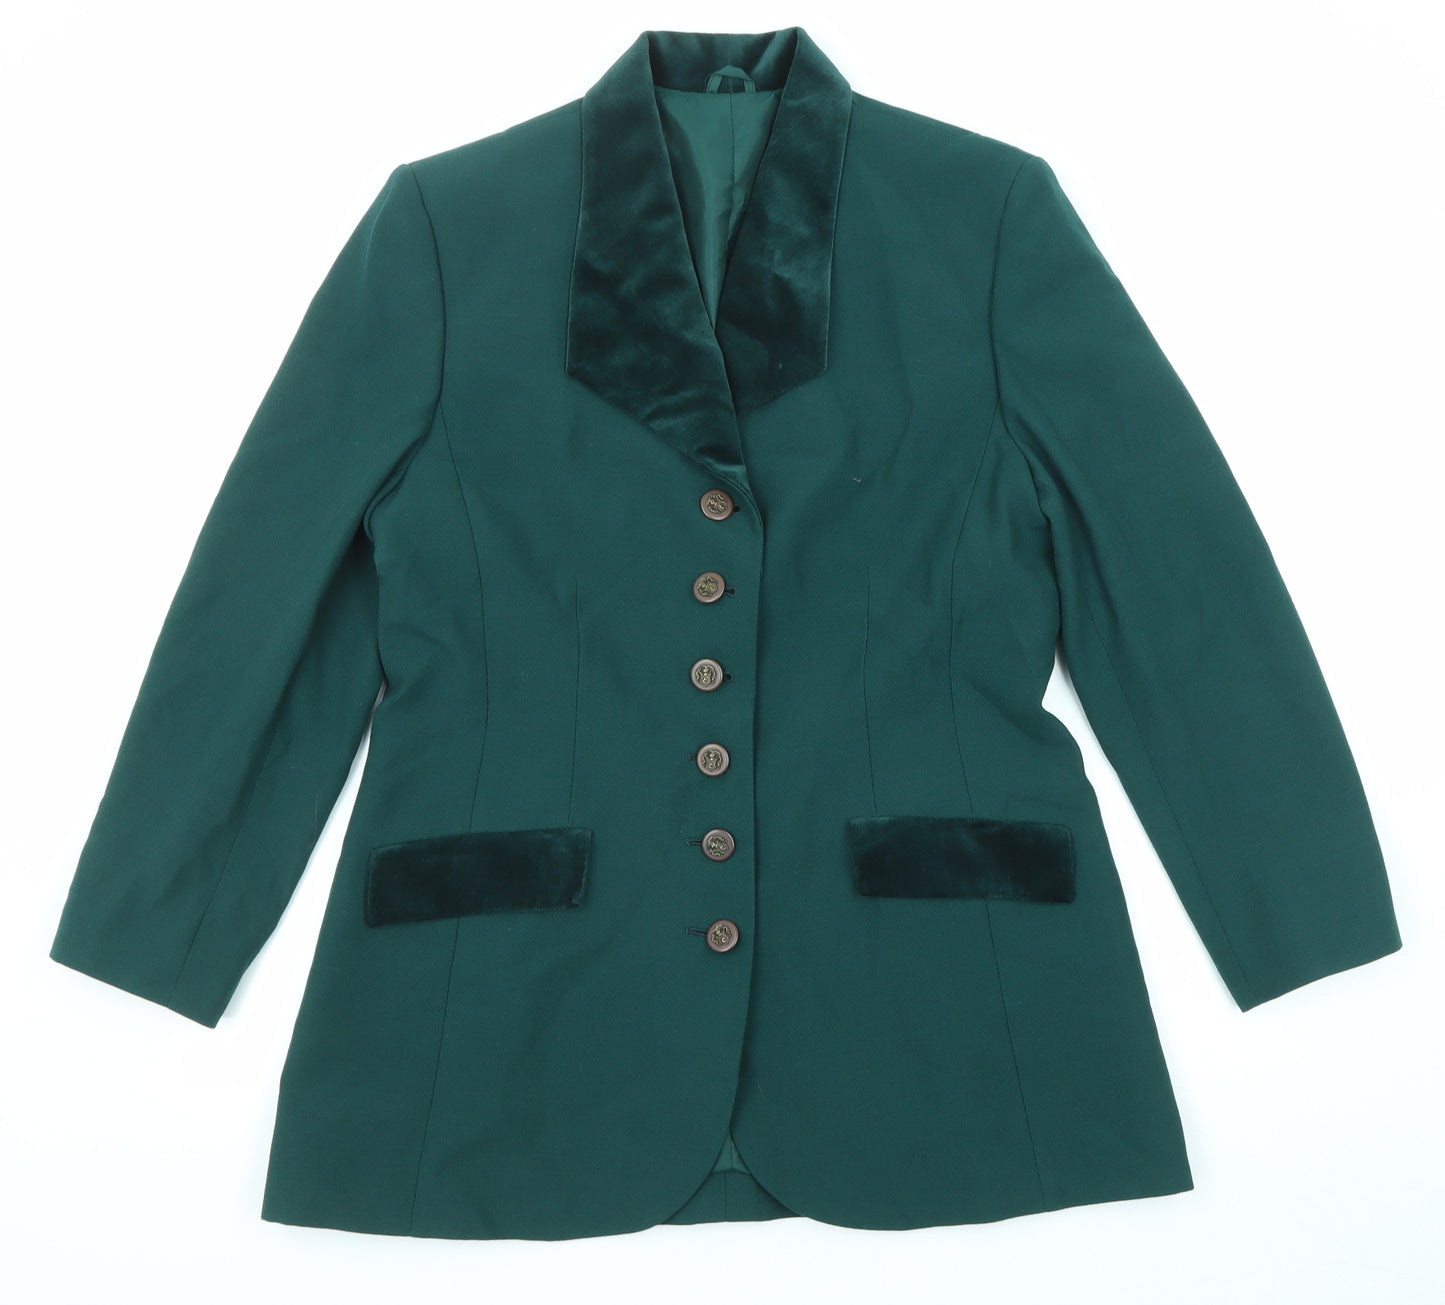 Country Casuals Womens Green Jacket Blazer Size 14 Button